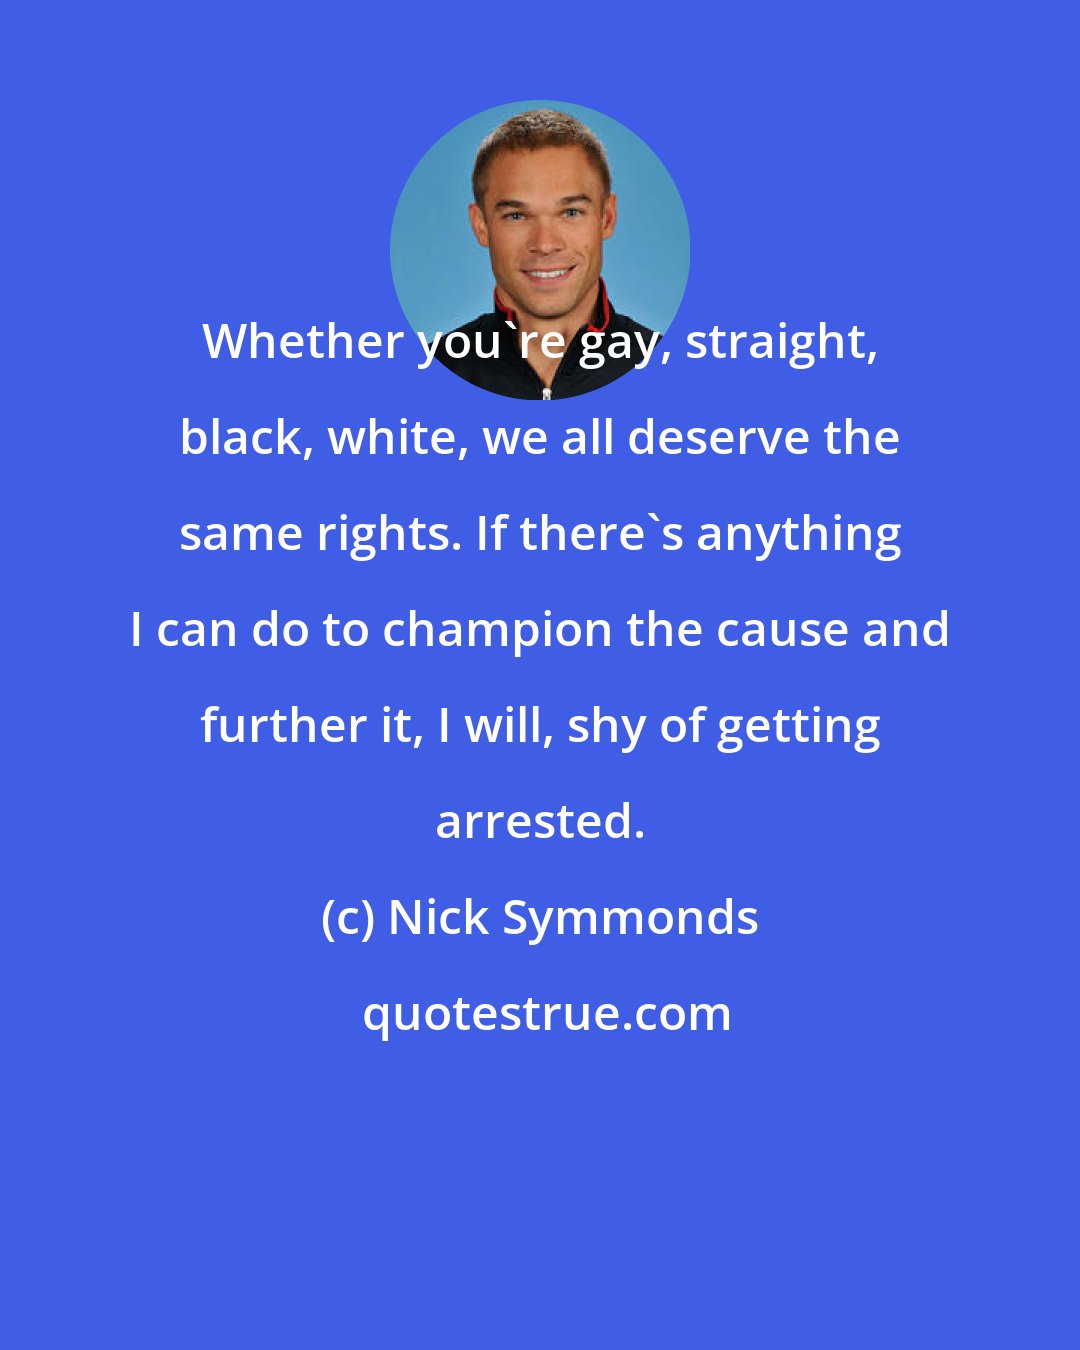 Nick Symmonds: Whether you're gay, straight, black, white, we all deserve the same rights. If there's anything I can do to champion the cause and further it, I will, shy of getting arrested.